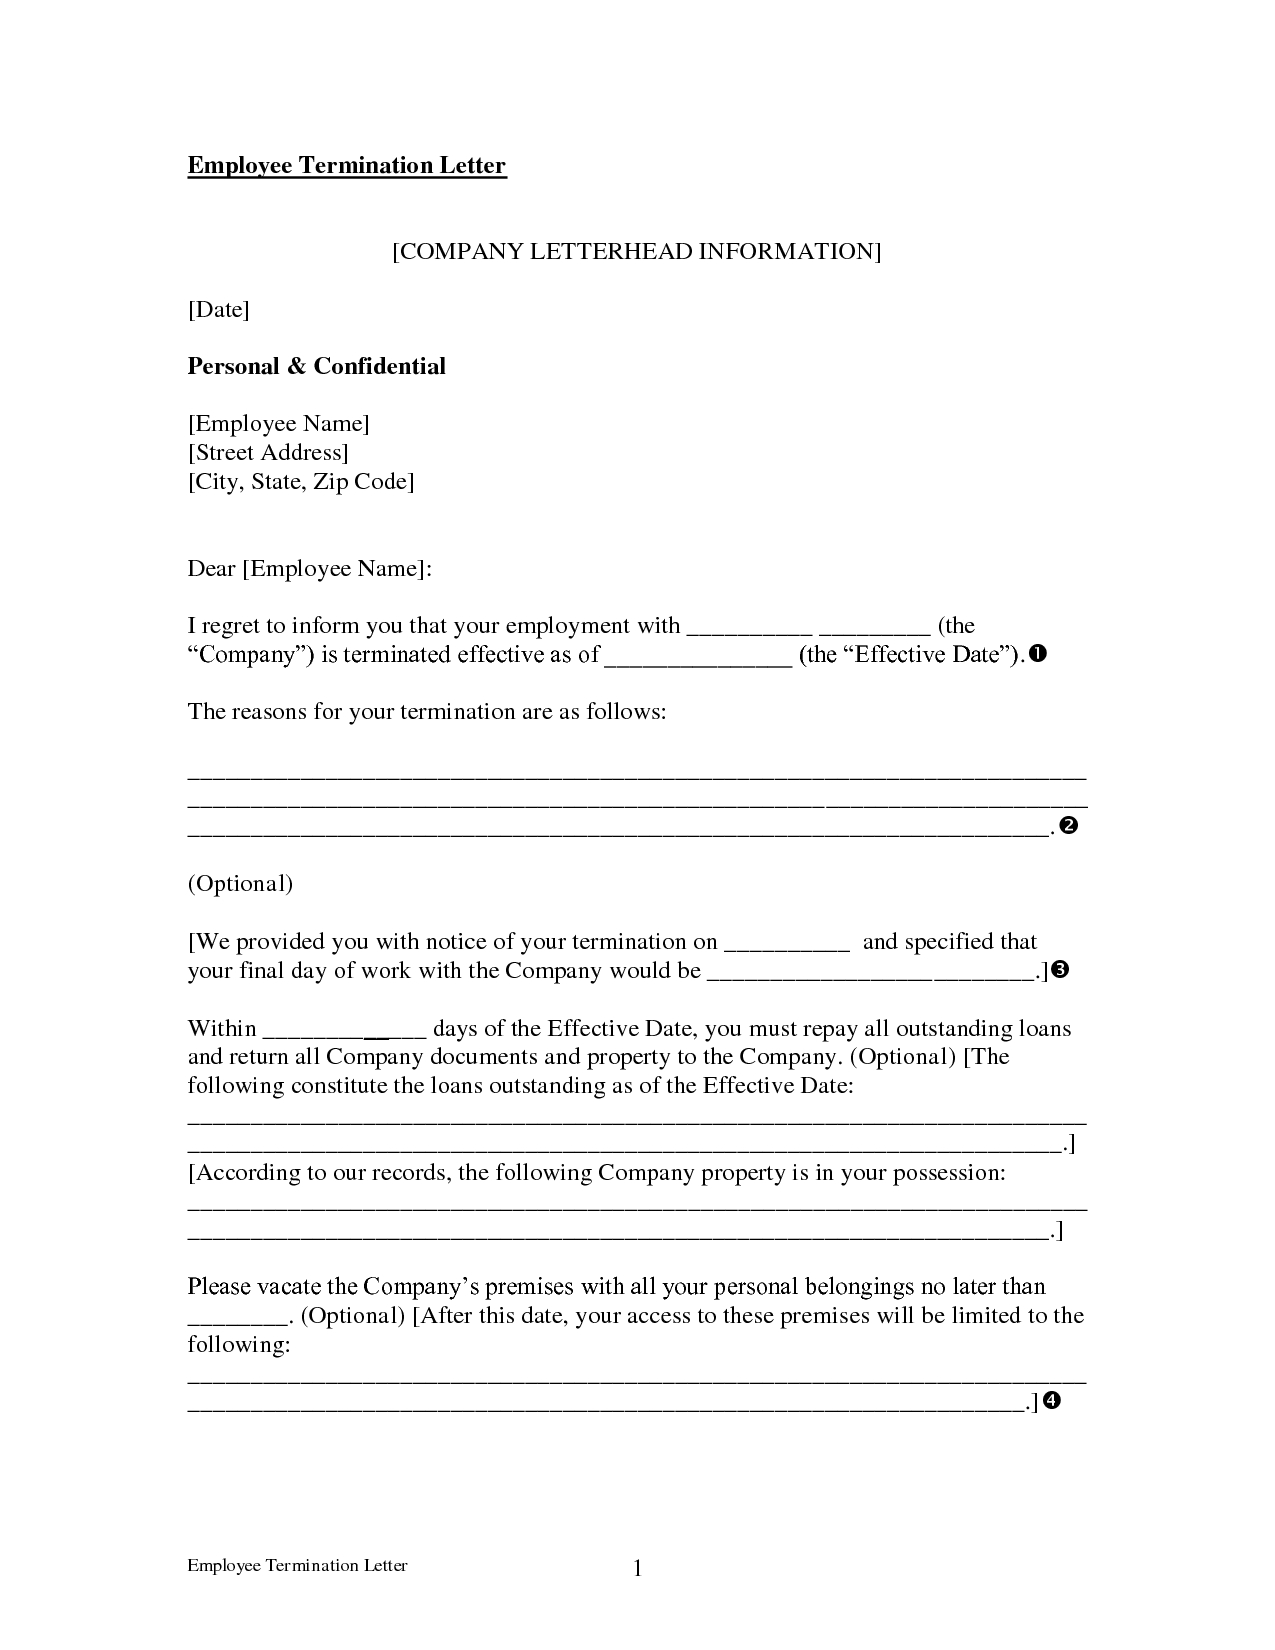 Dismissal Letter Template - Example Termination Letter to Employee Samples